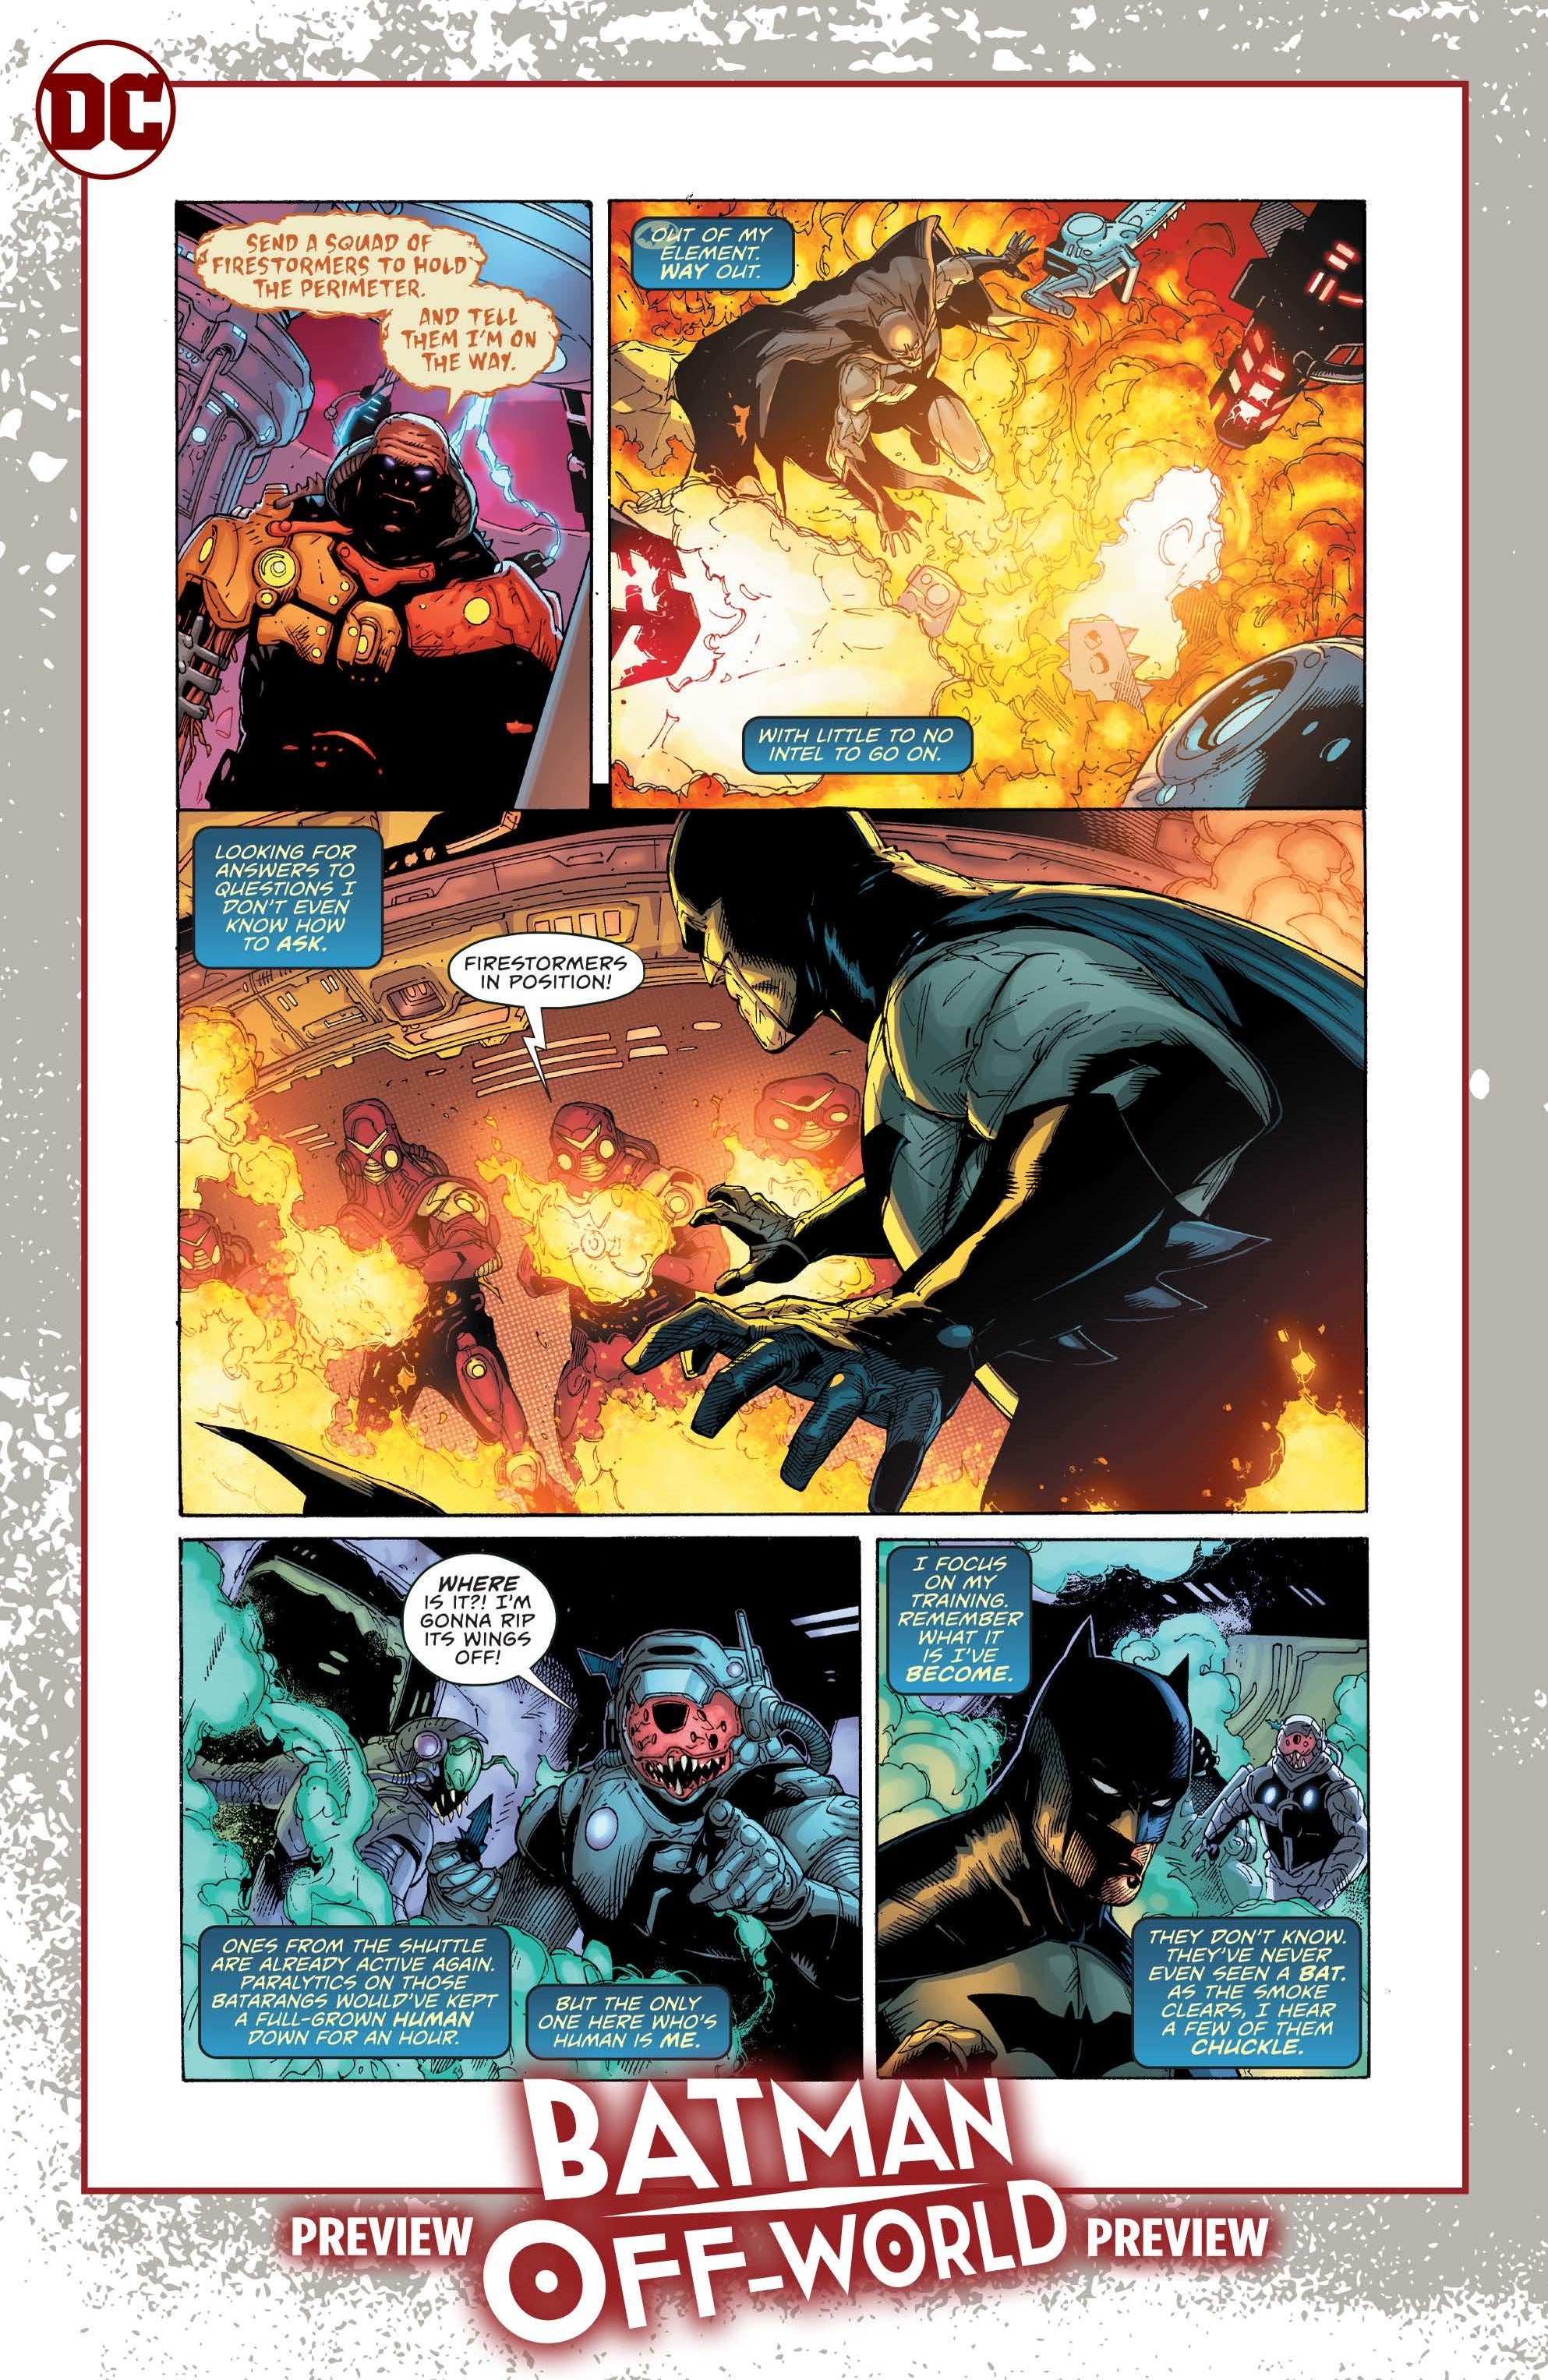 batman-off-world-preview-page-3.jpg